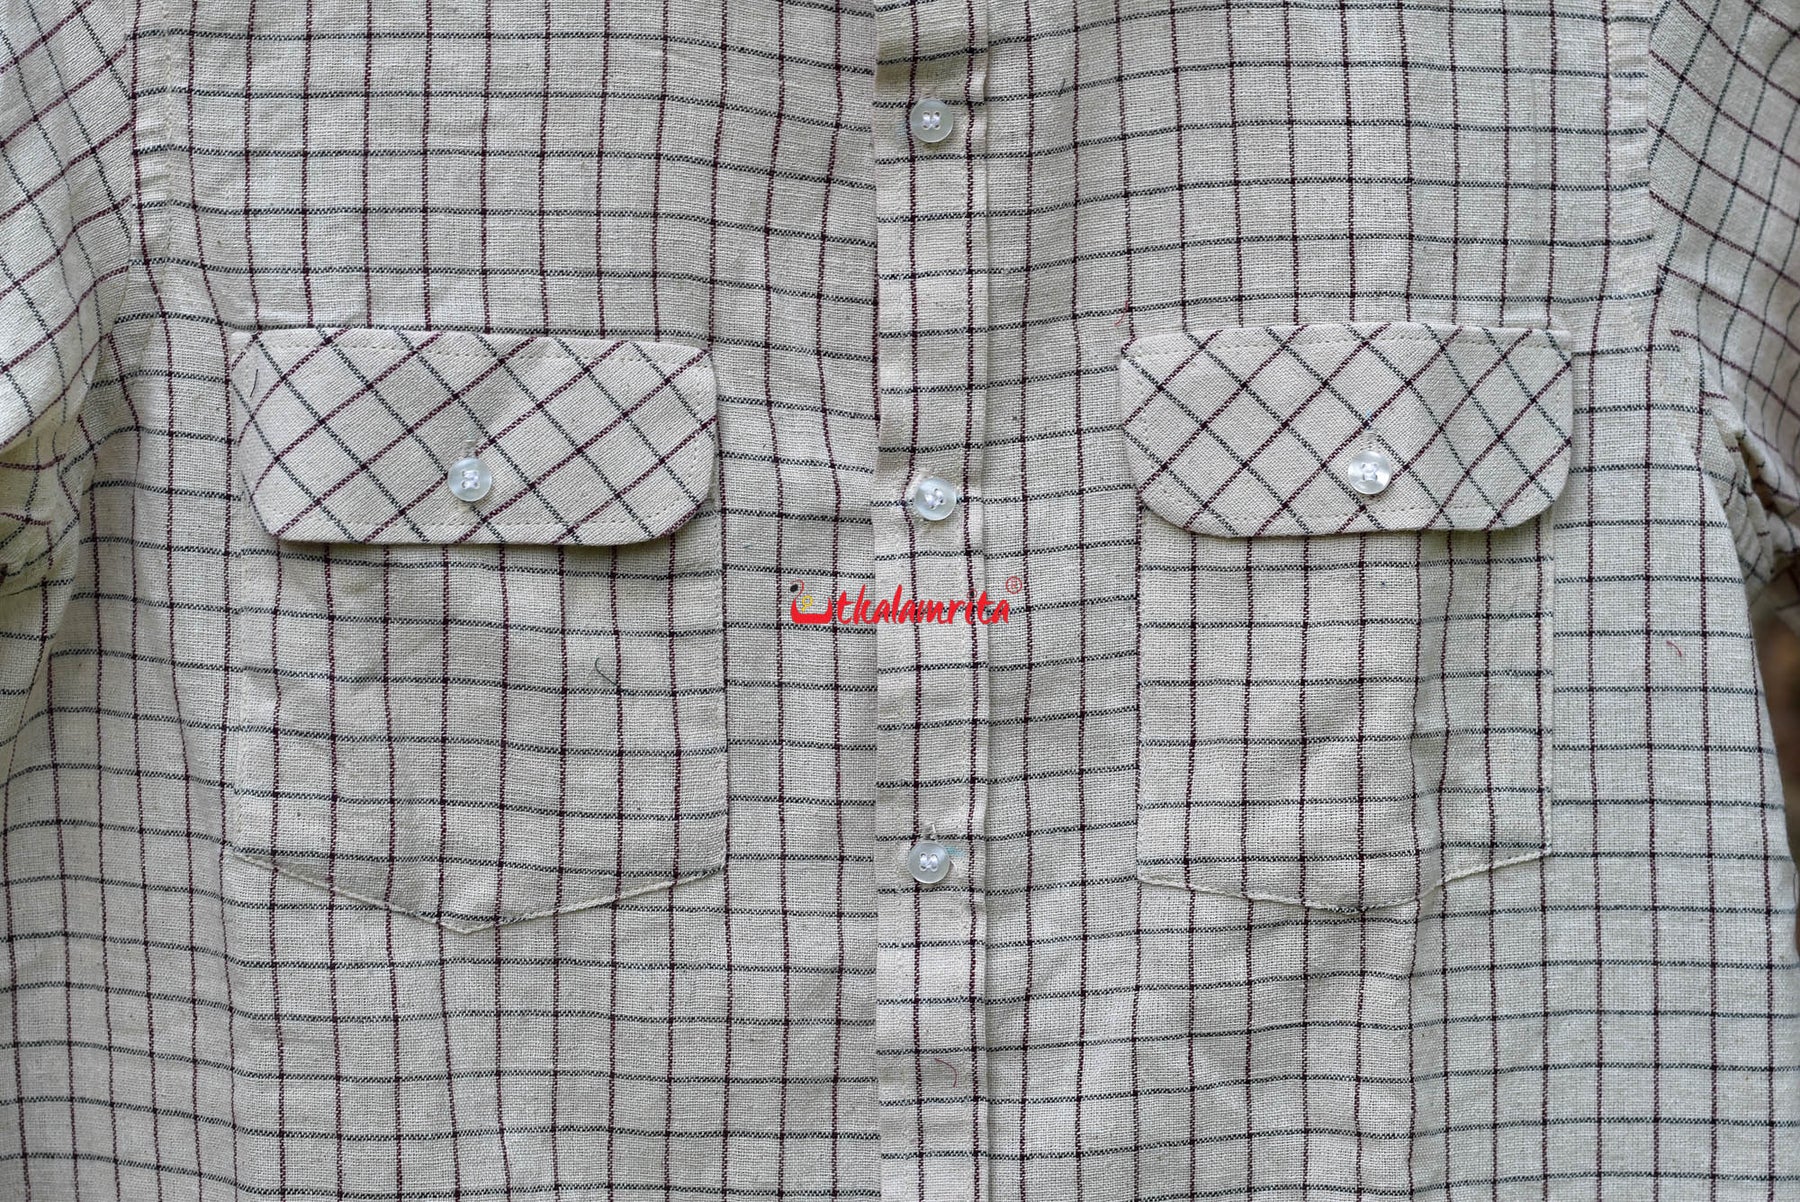 Loop Full Shirt with Pocket Covers- Narrower Checks Over Off-White